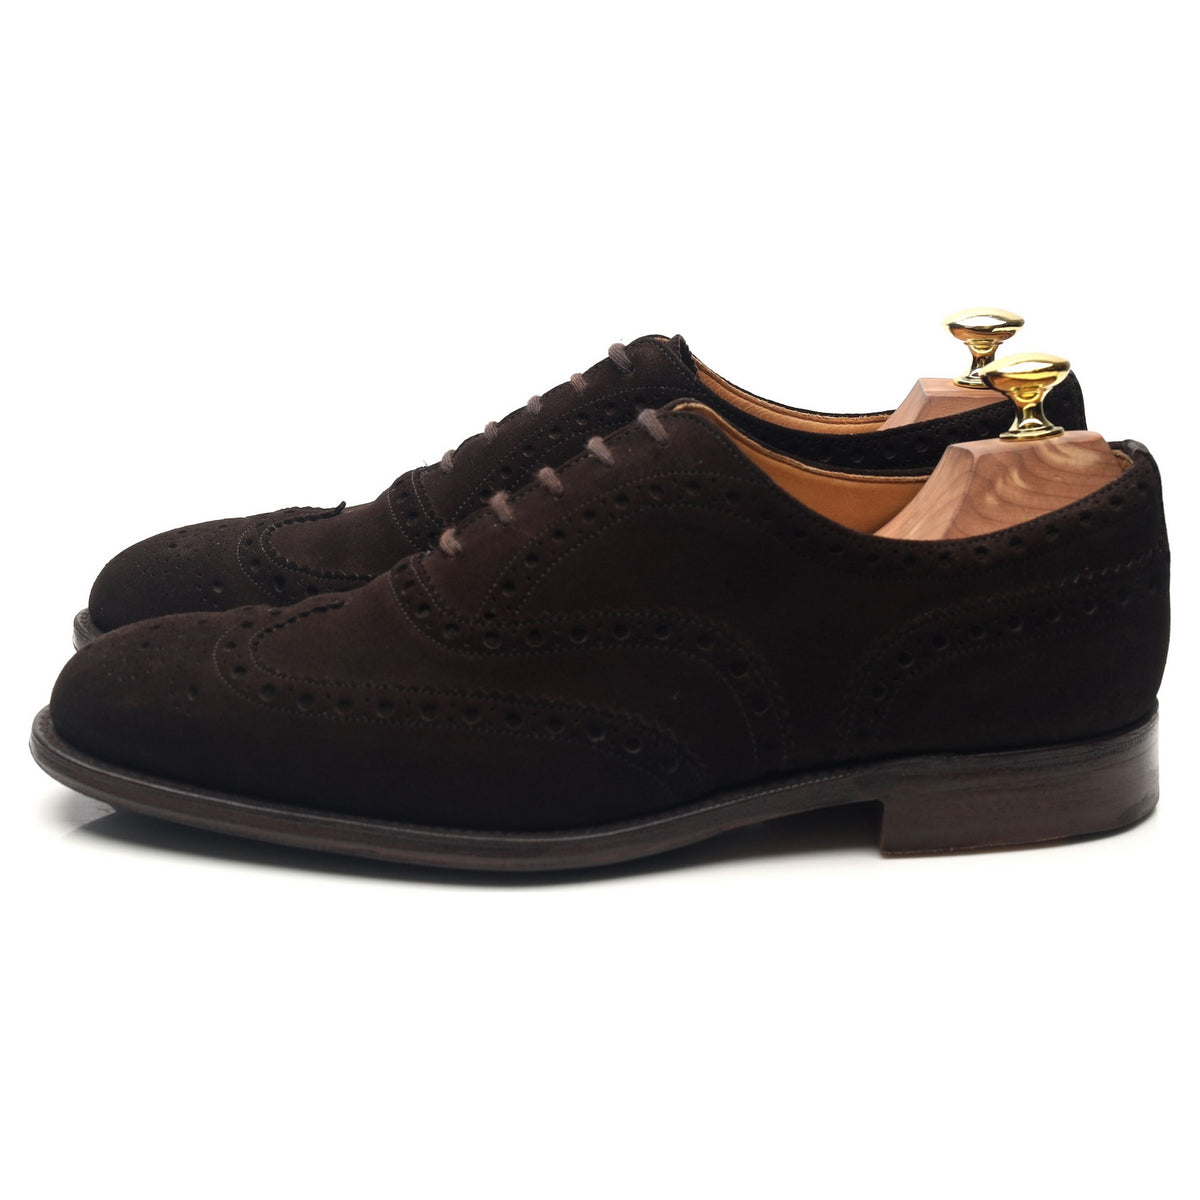 Chetwynd' Dark Brown Suede Brogues UK 7 F - Abbot's Shoes